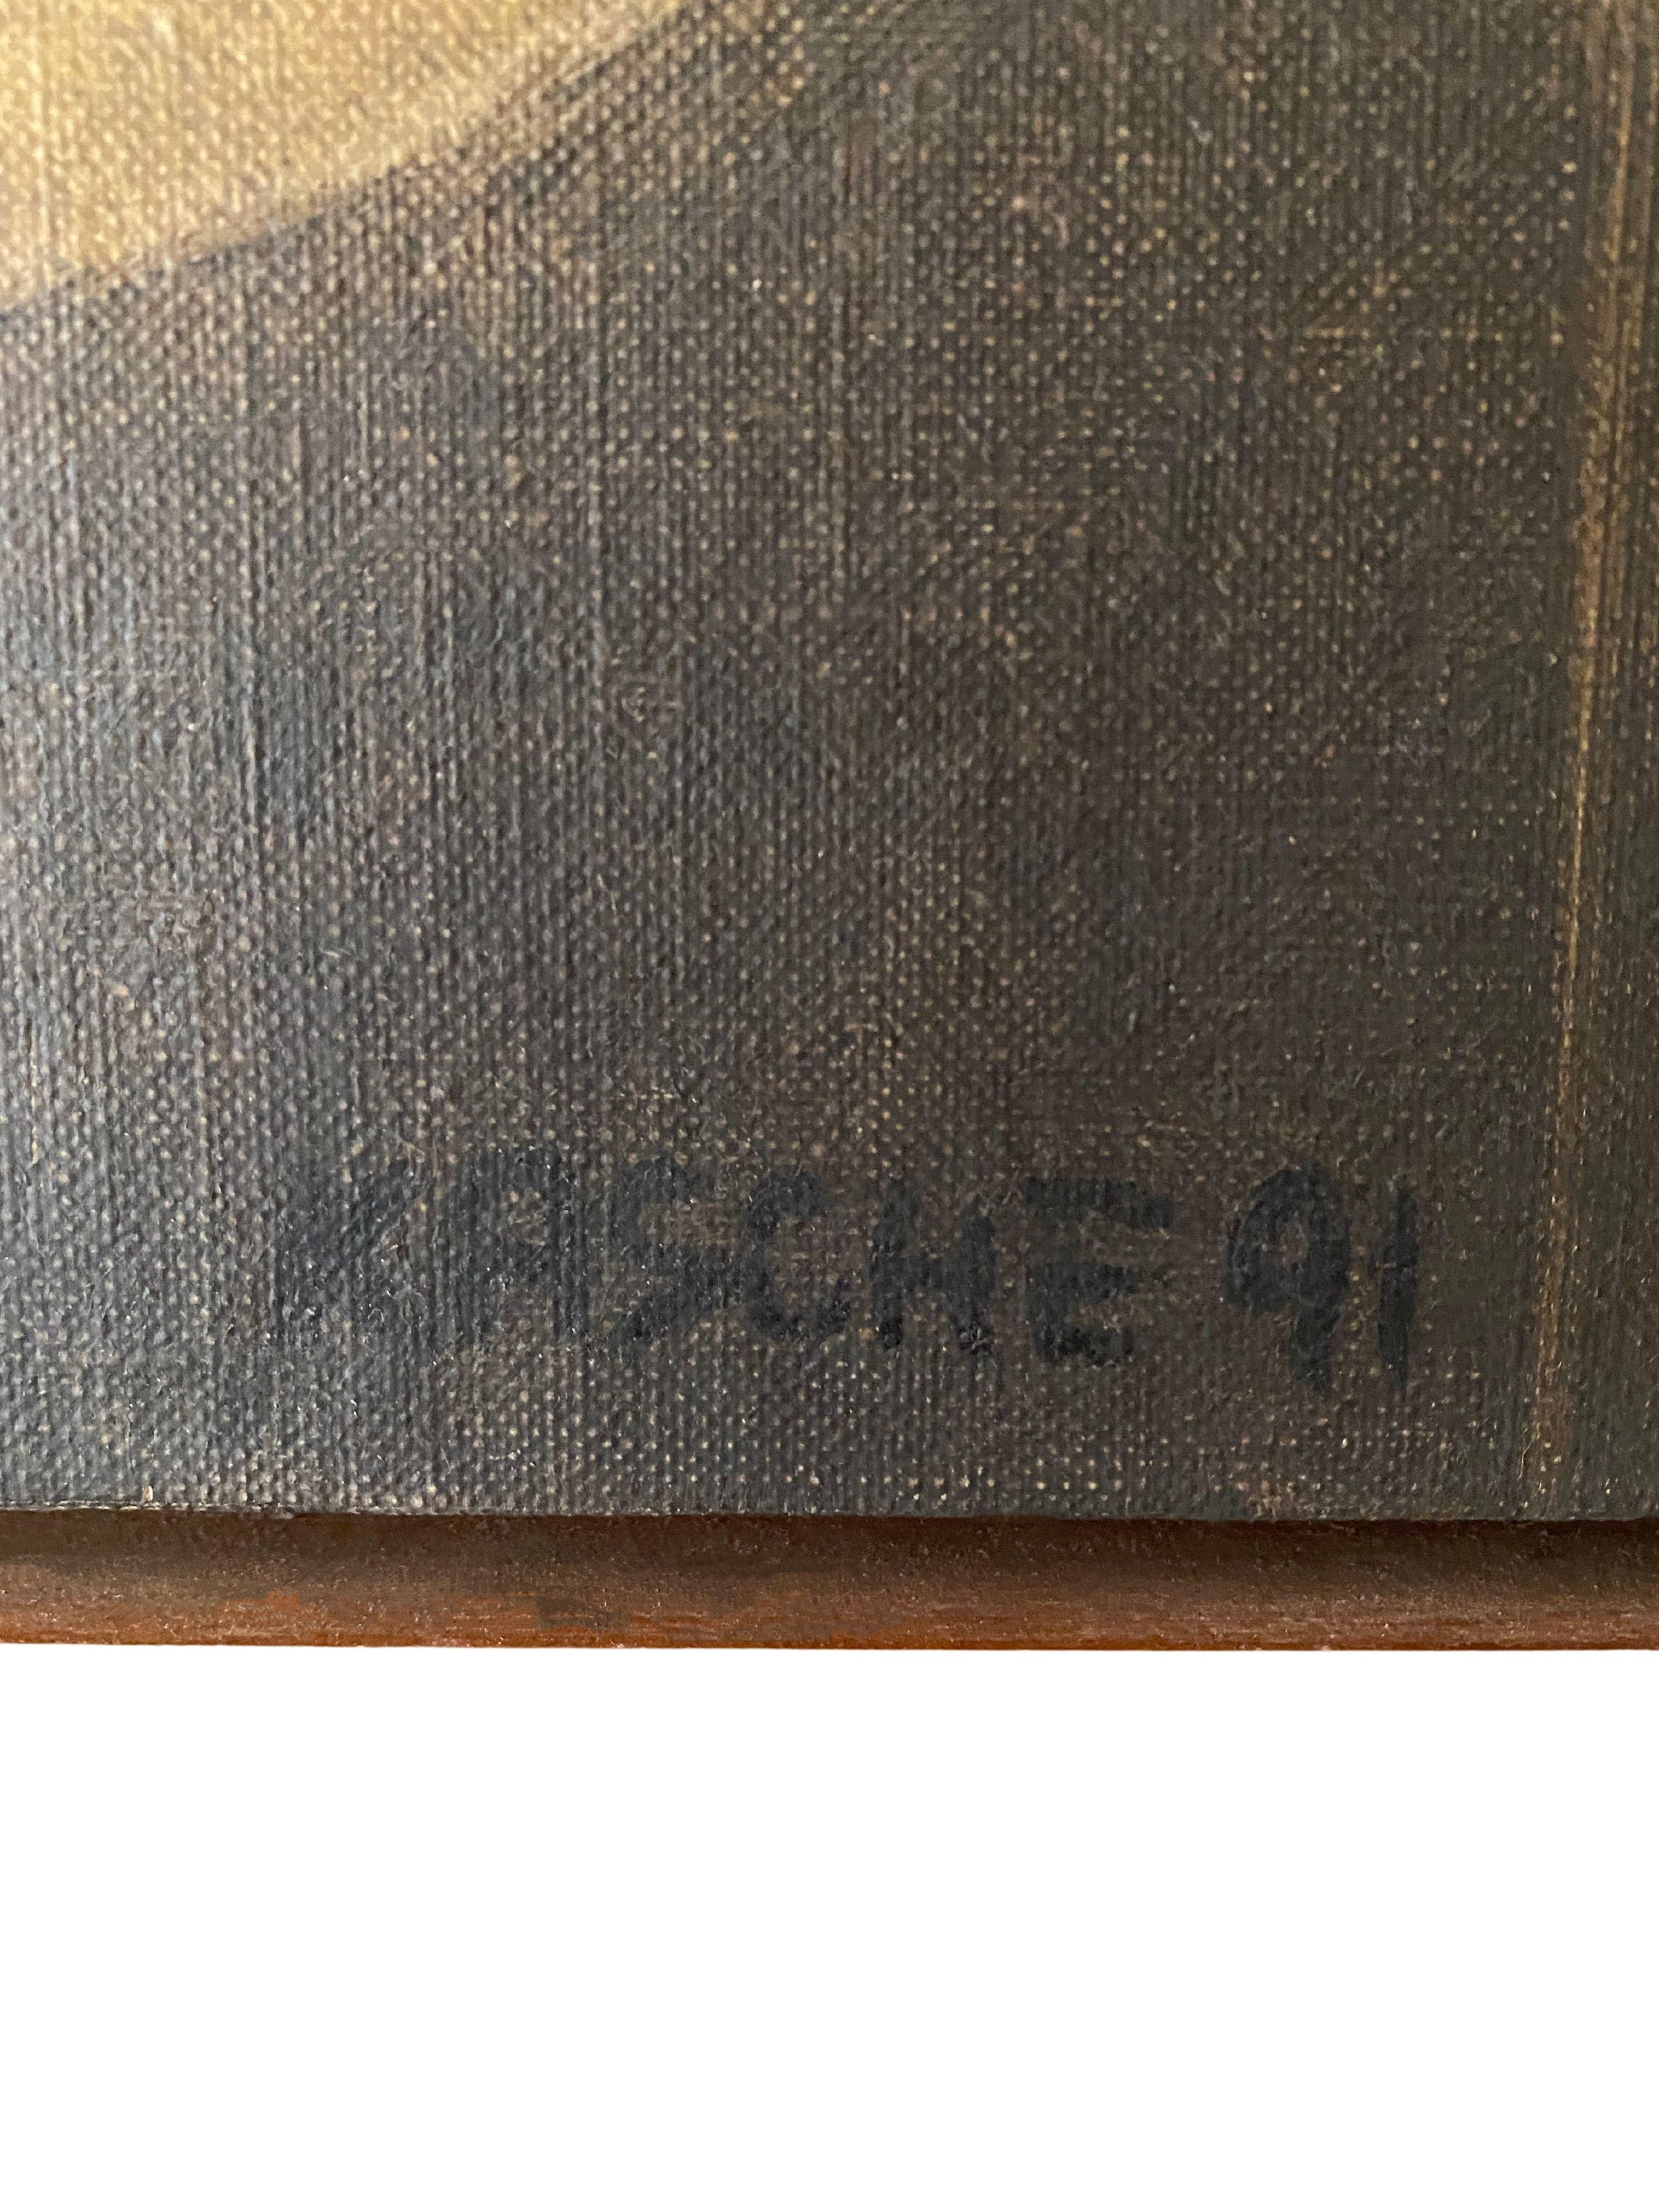 German Figurative Painting of Female Signed Kasche 91